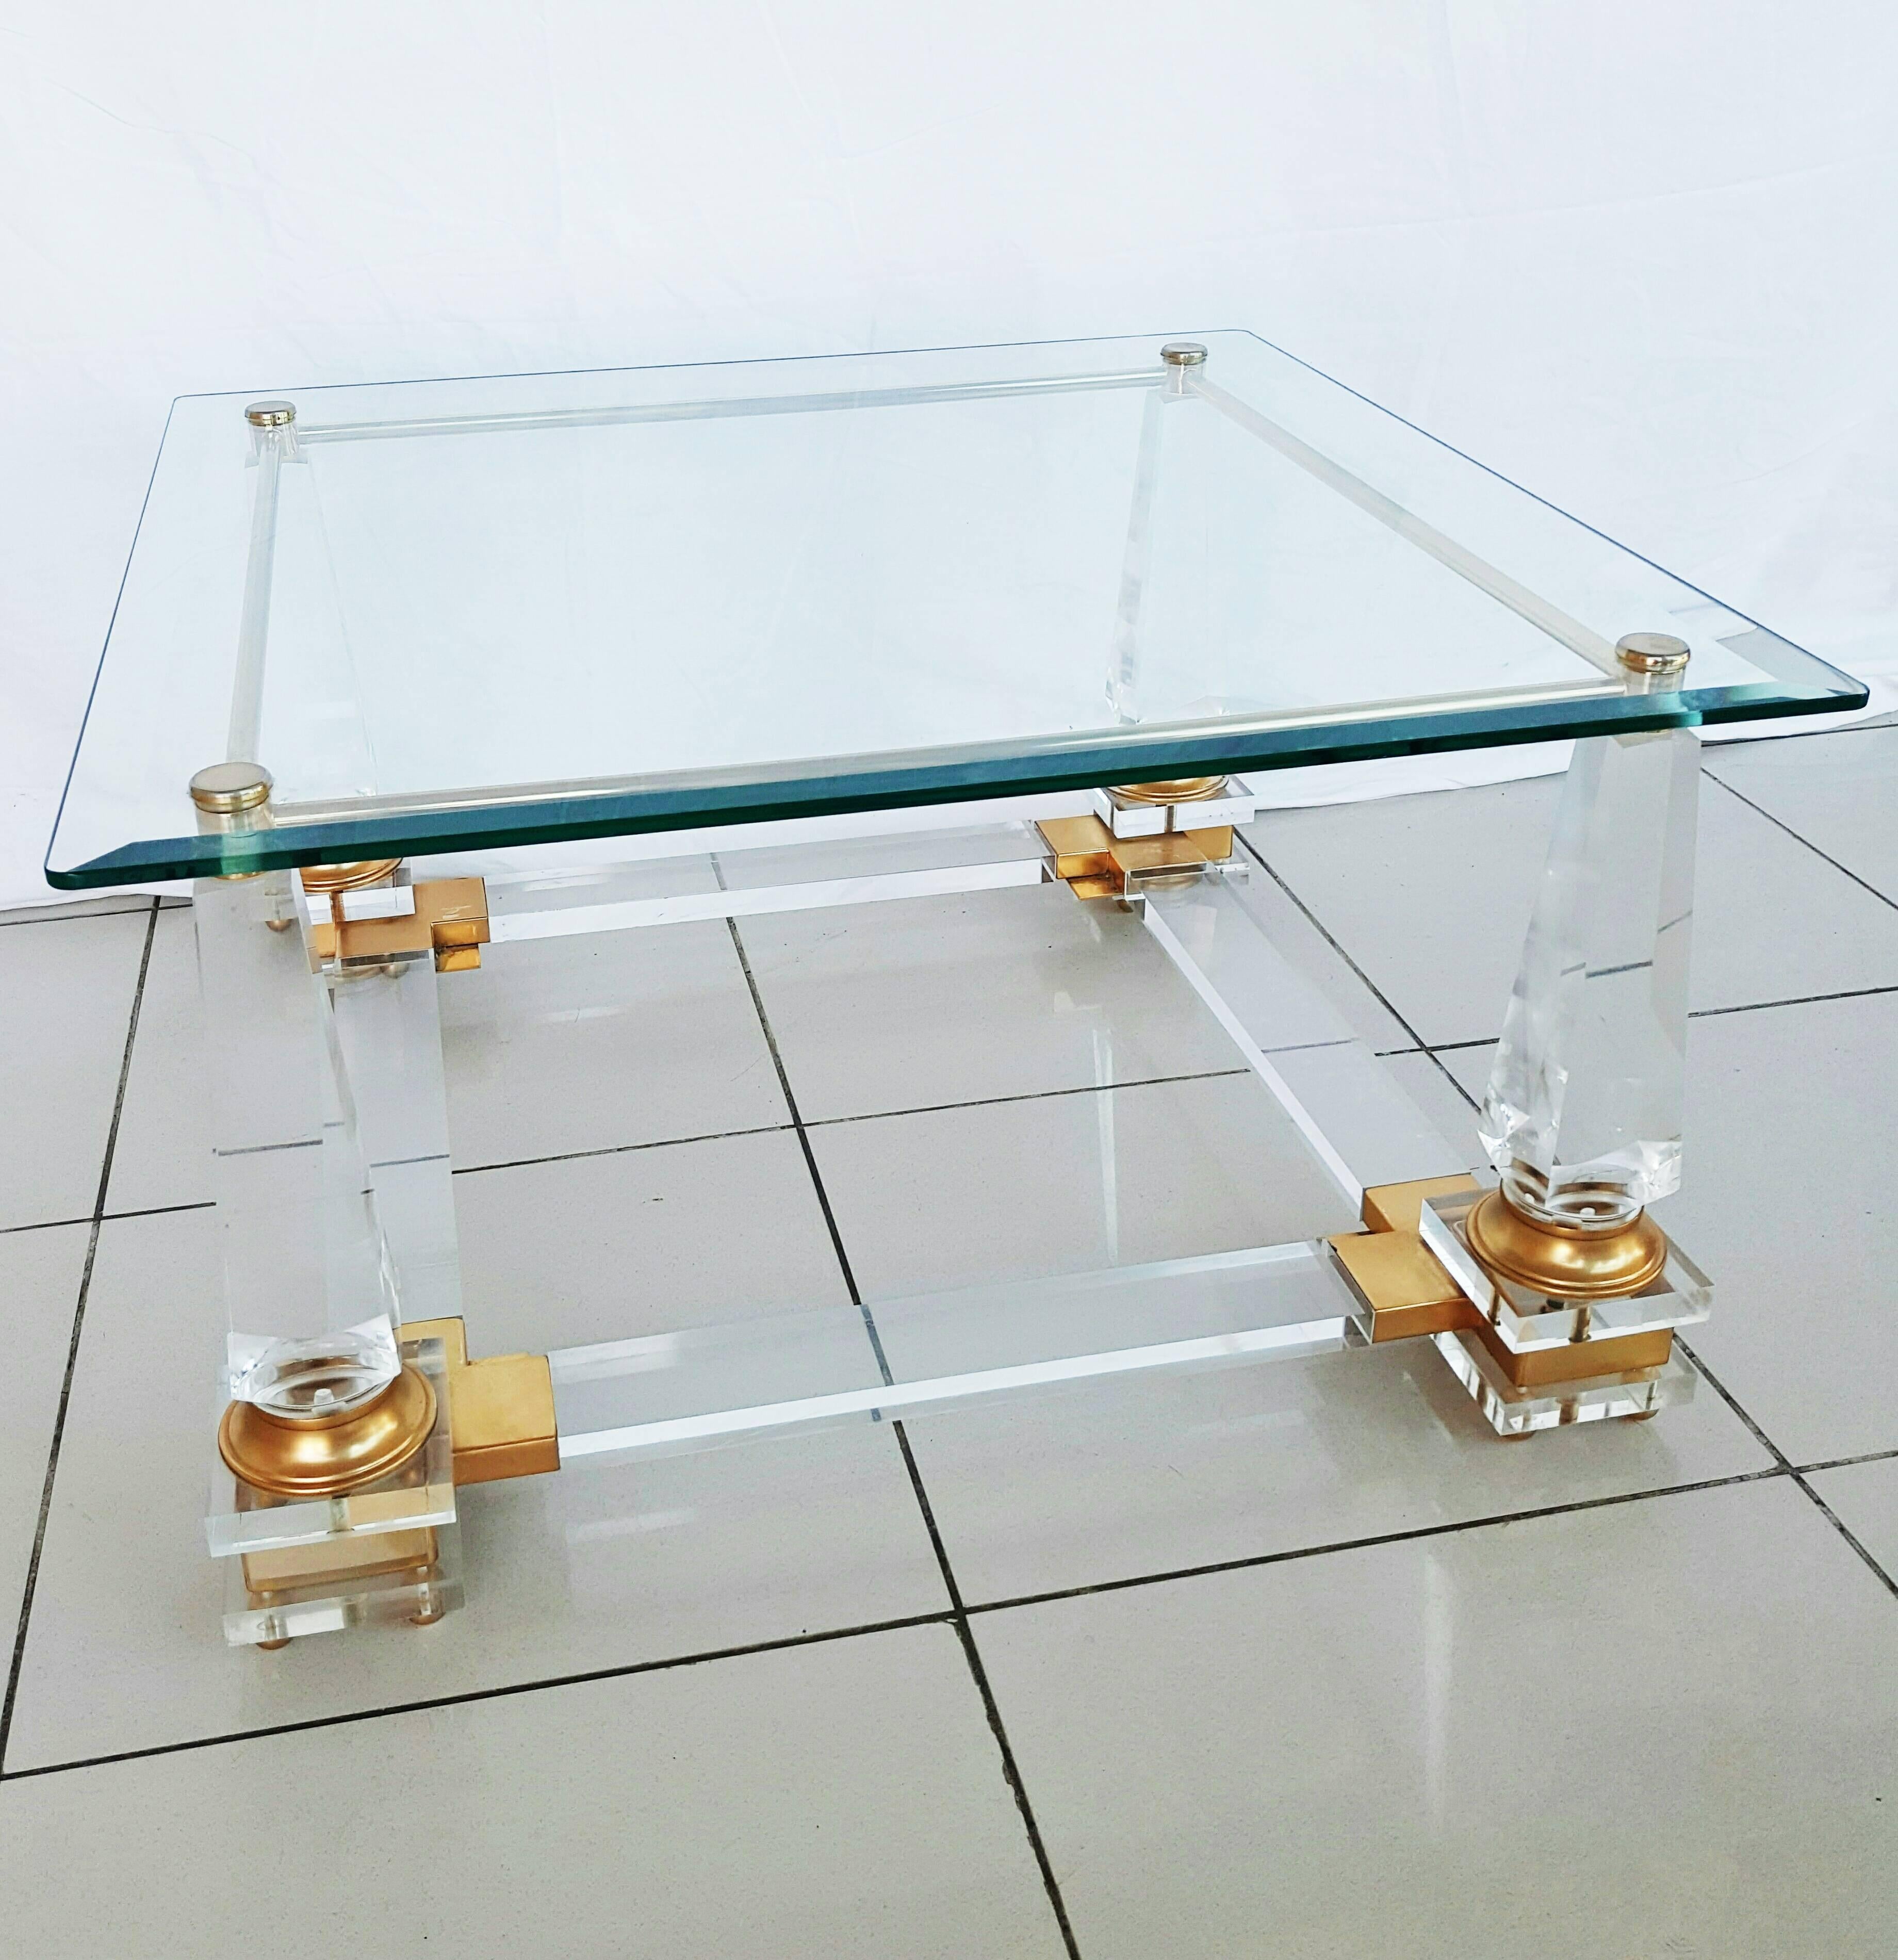 Beautiful French coffee table in the style of Maison Jansen, 1970s.
Brass, Lucite and glass, in perfect vintage condition.